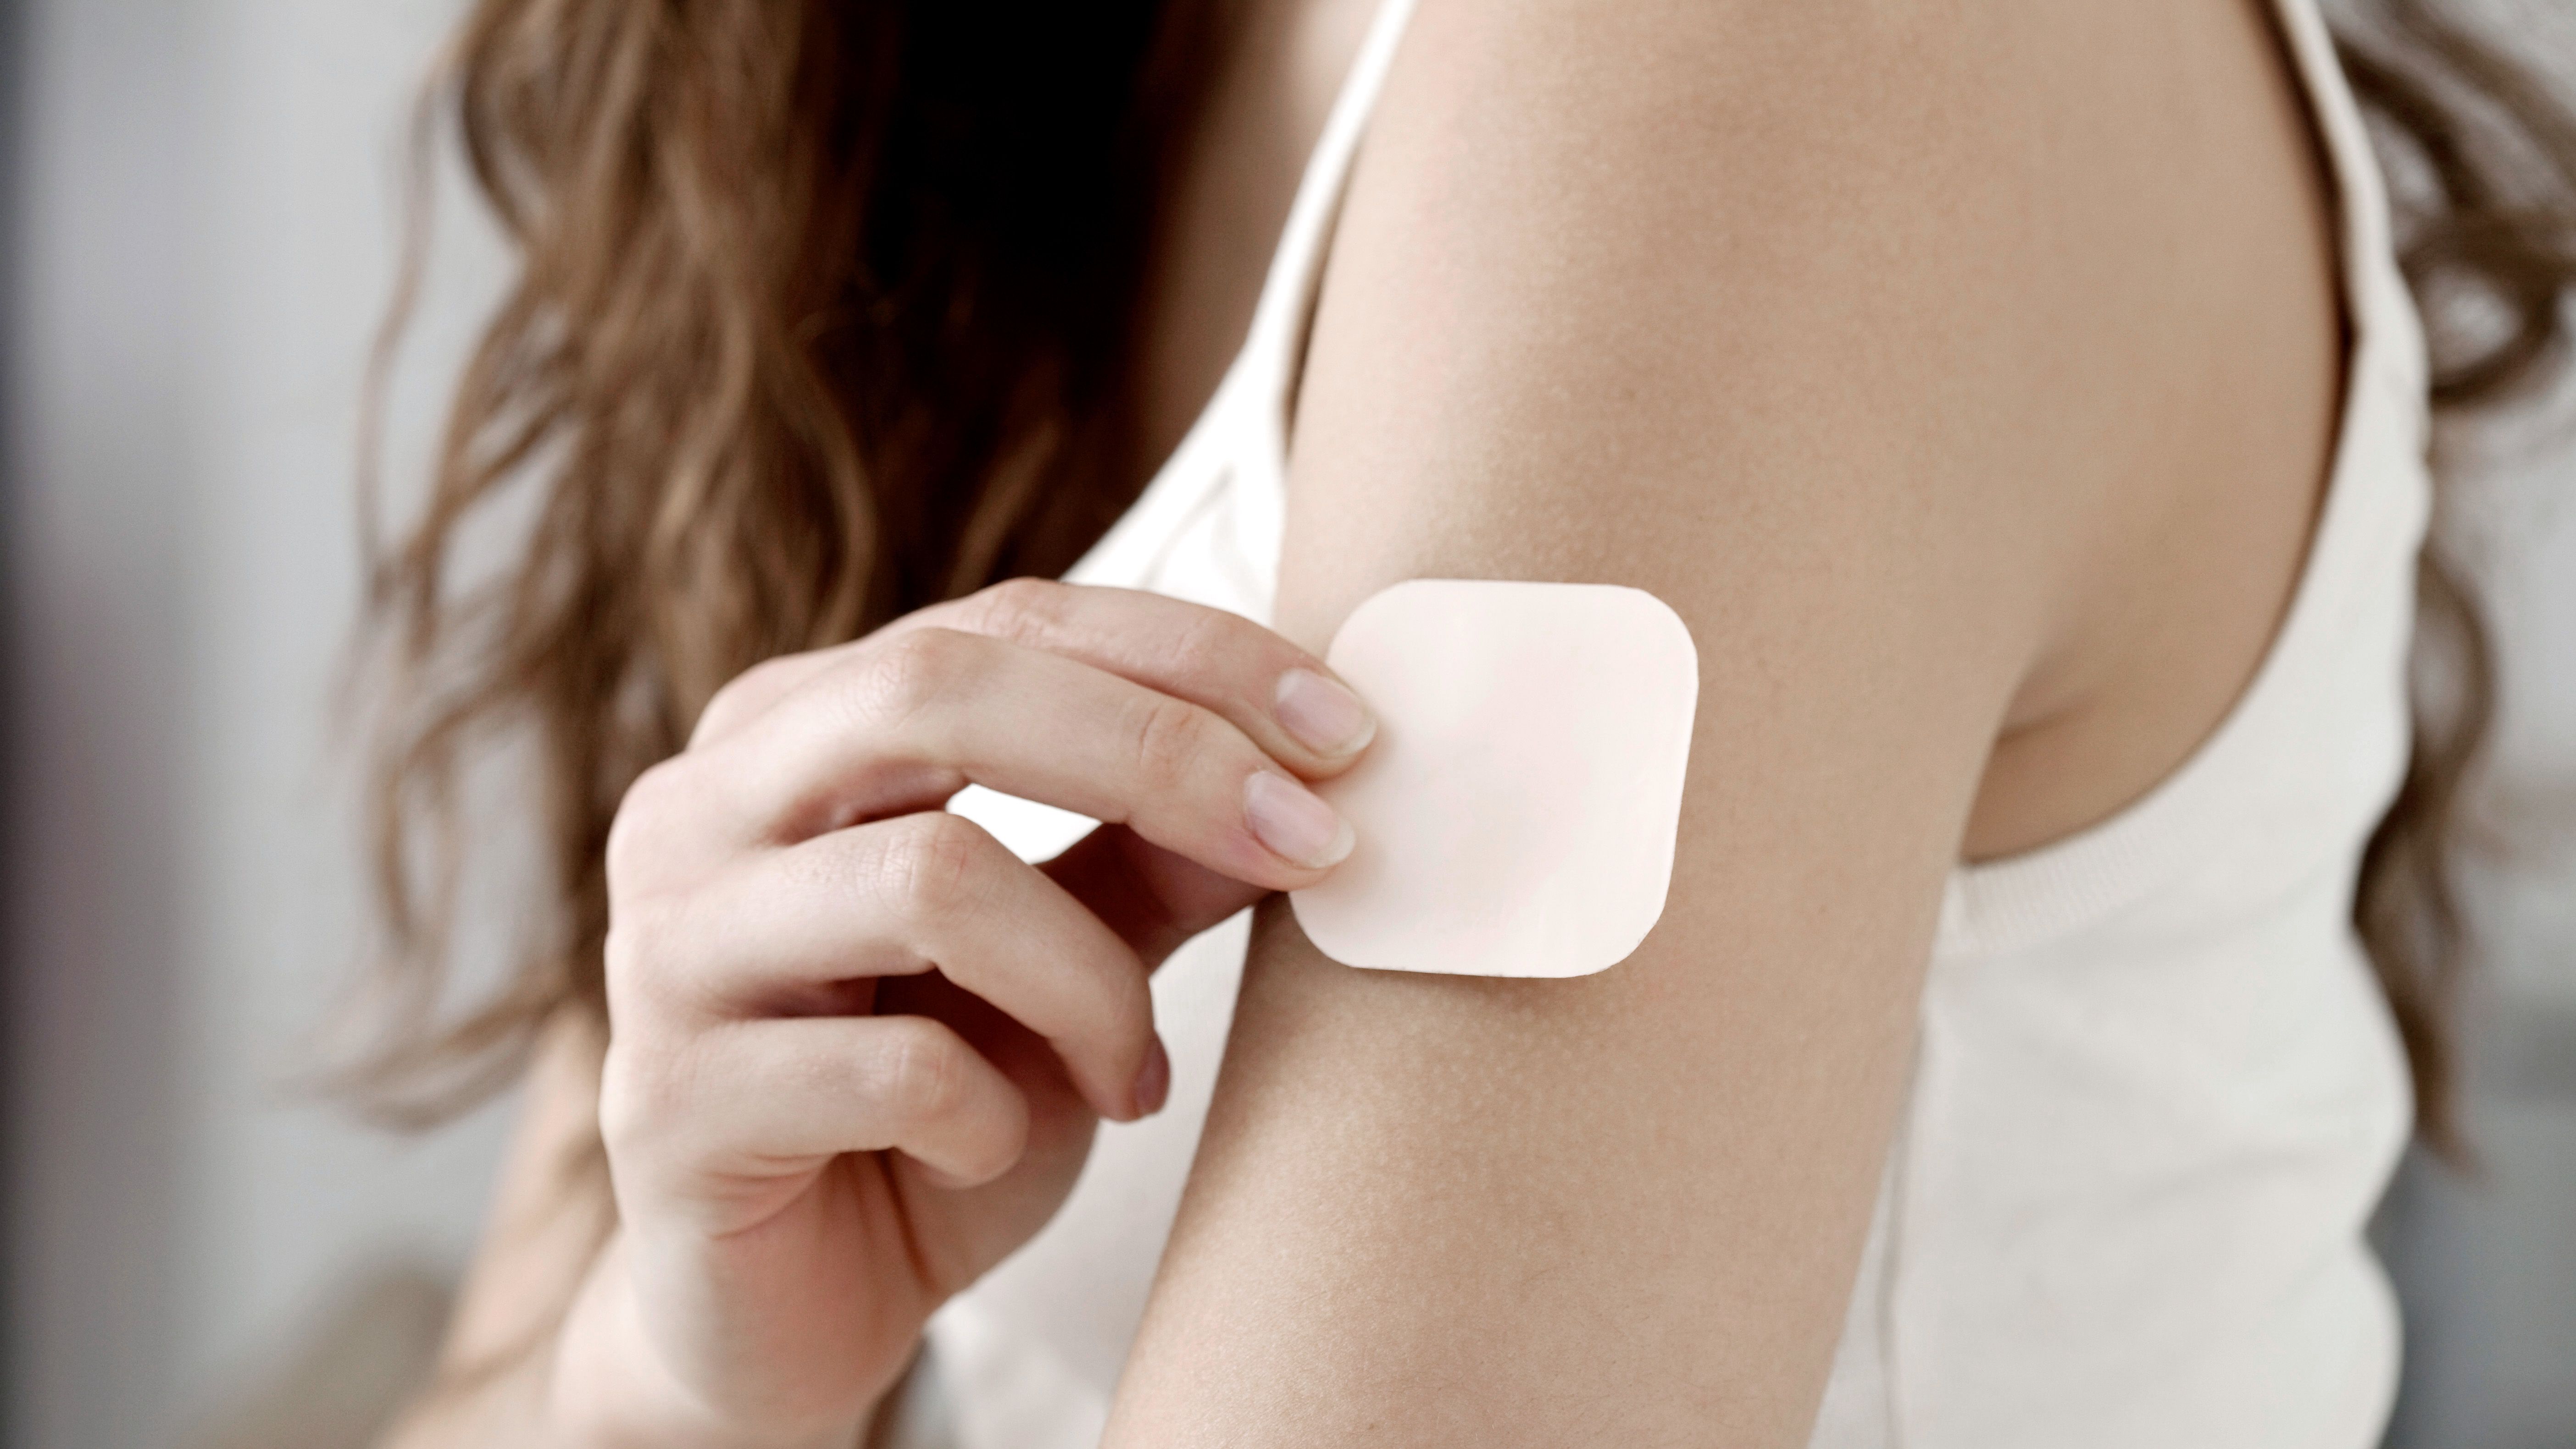 Weight Loss Patches: Ingredients, Side Effects, Risks, And More